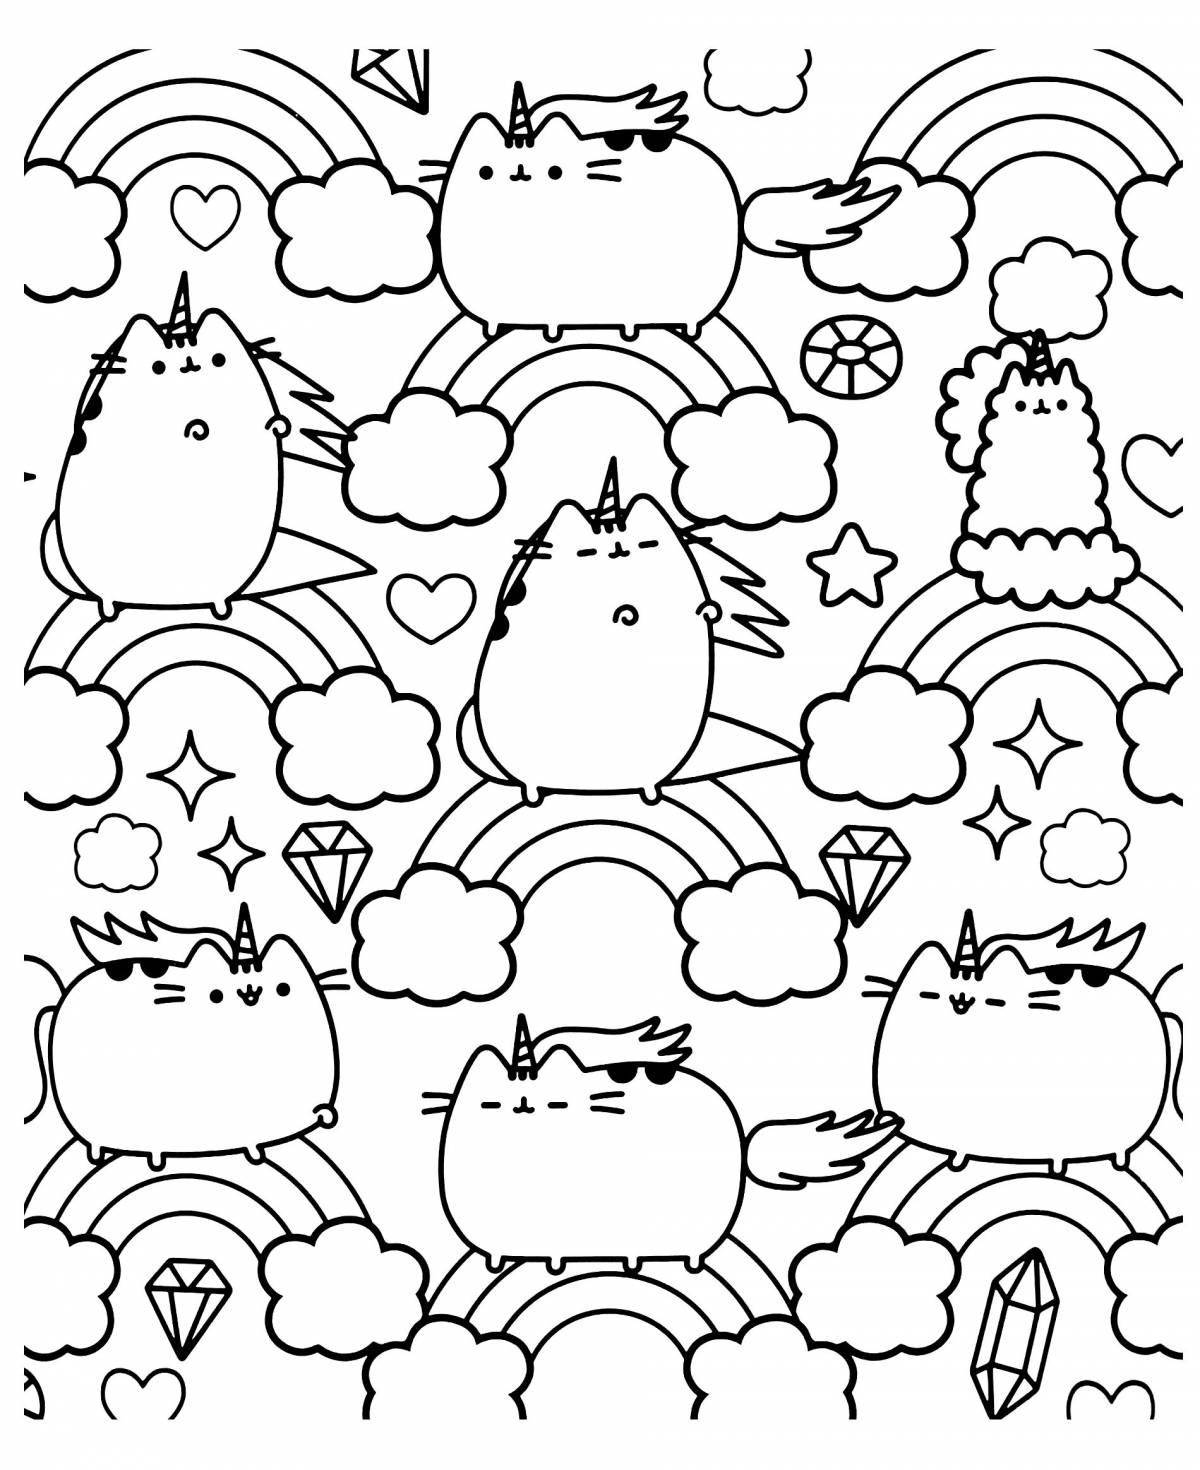 Colouring quirky pusheen stickers